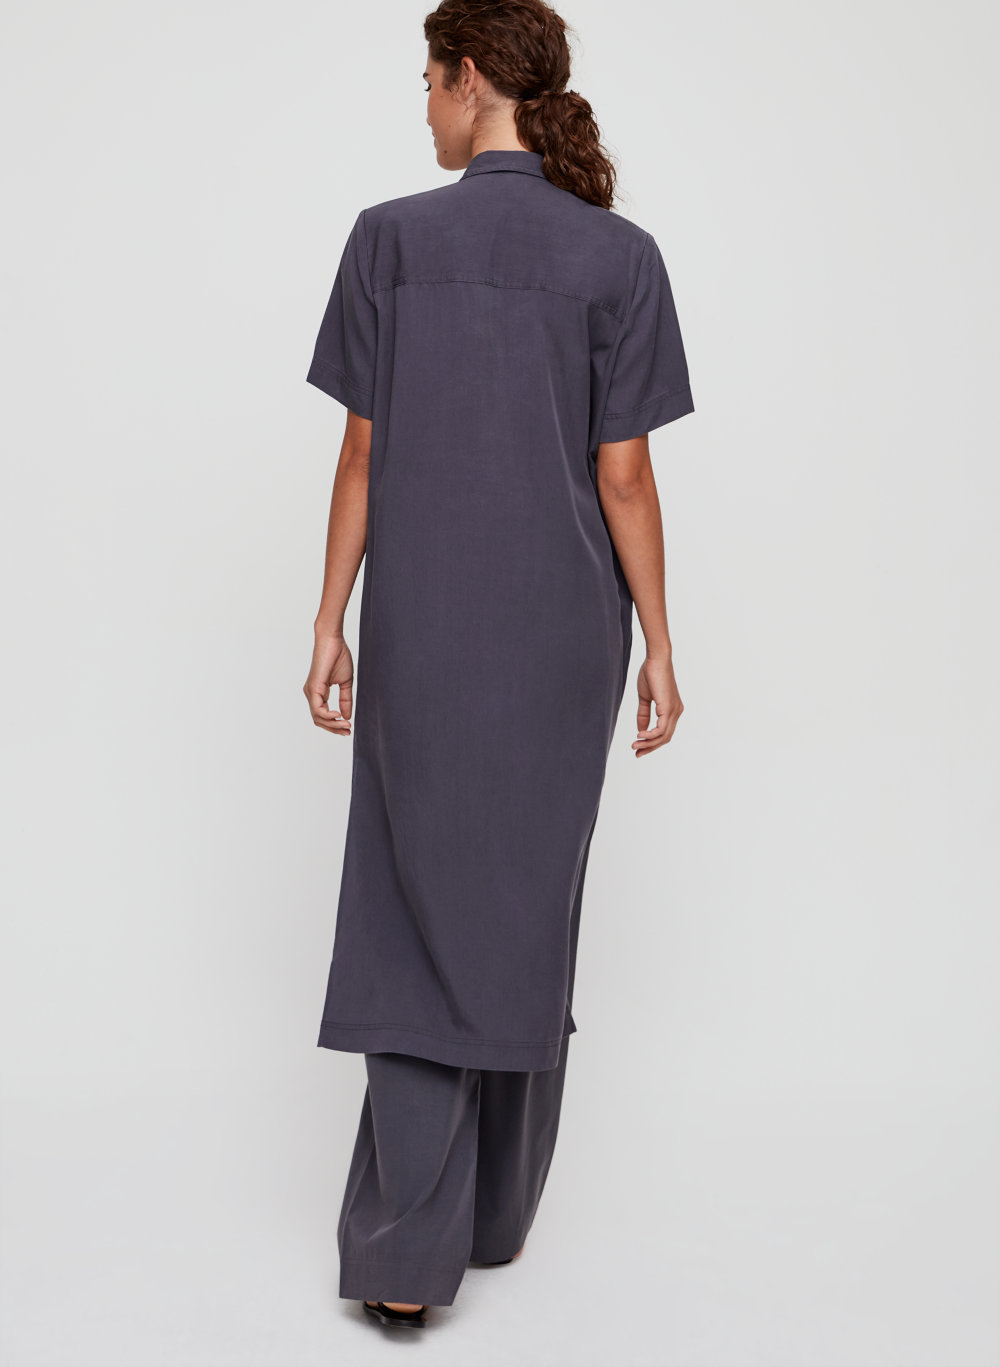 The Group by Babaton AKNER DRESS | Aritzia US